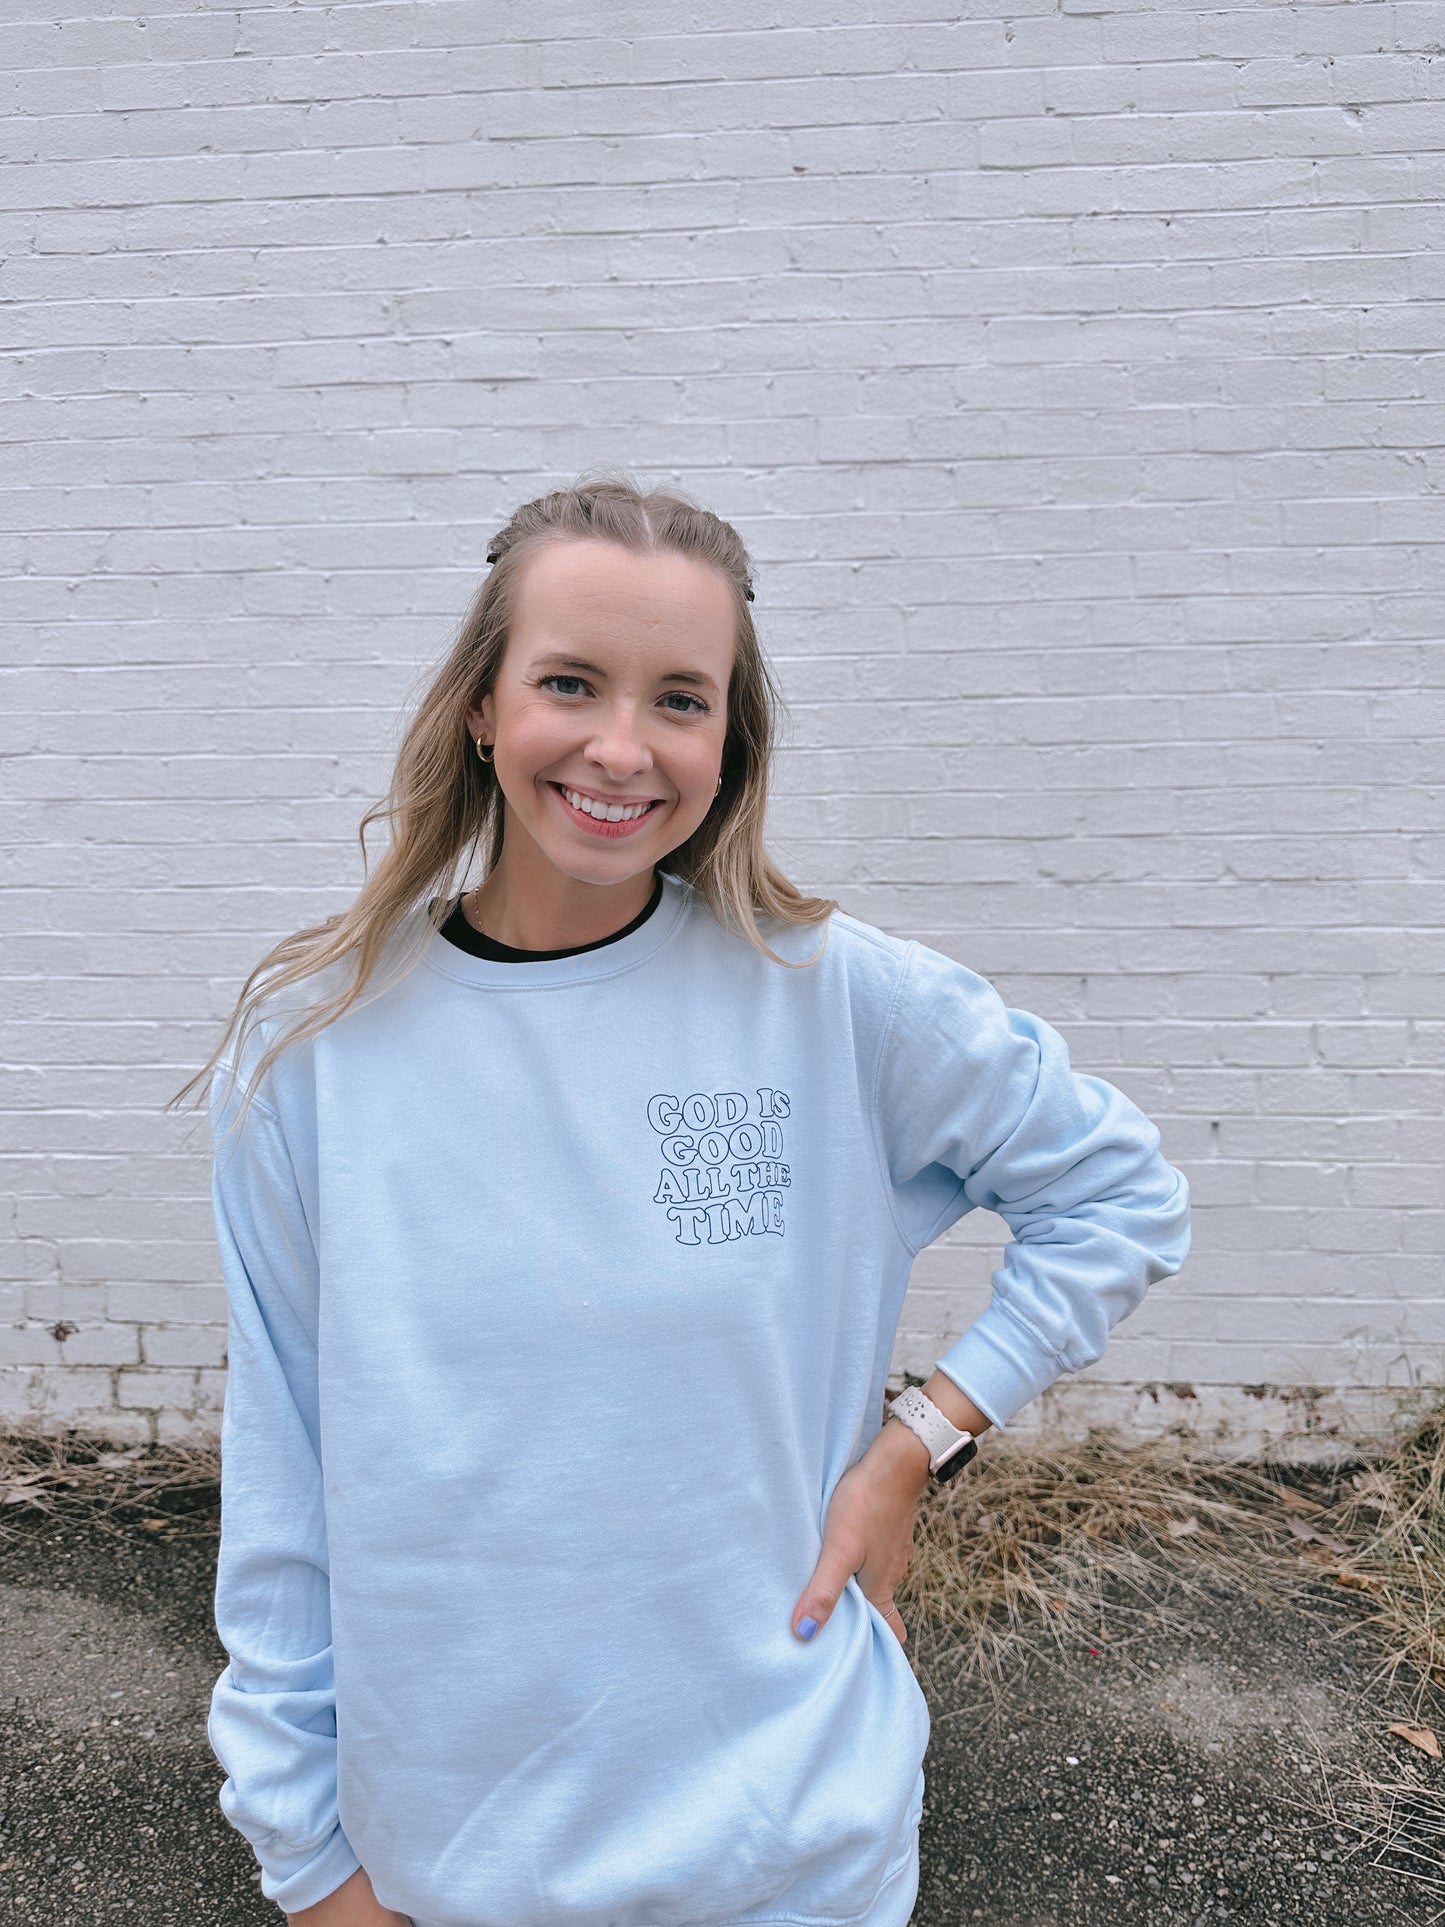 God is Good All the Time | Comfort Colors Sweatshirt